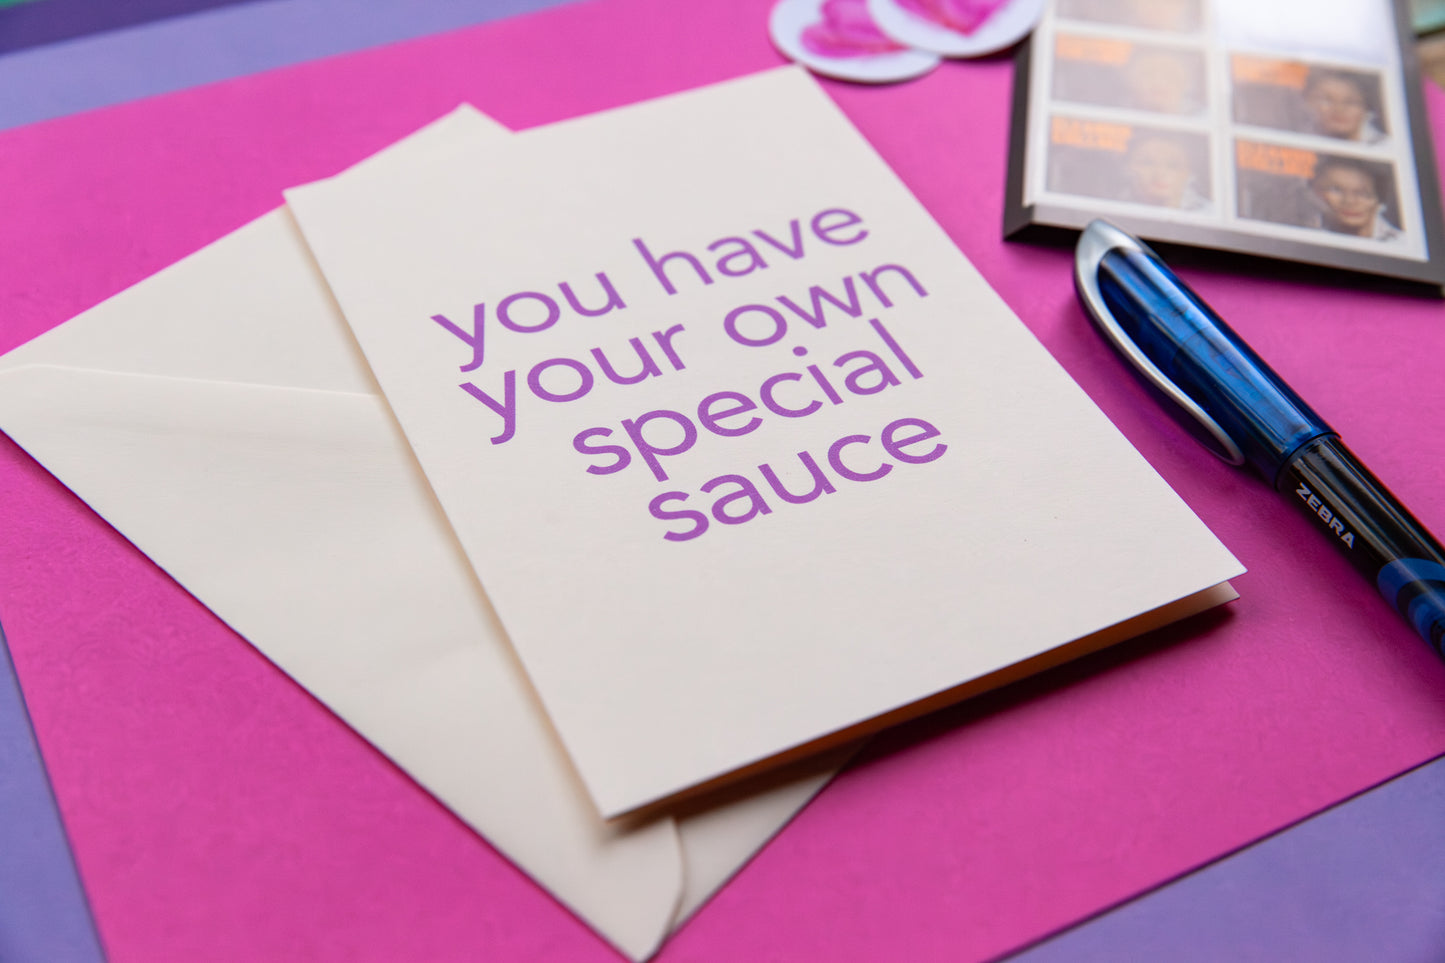 Your Special Sauce Affirmation Greeting Card